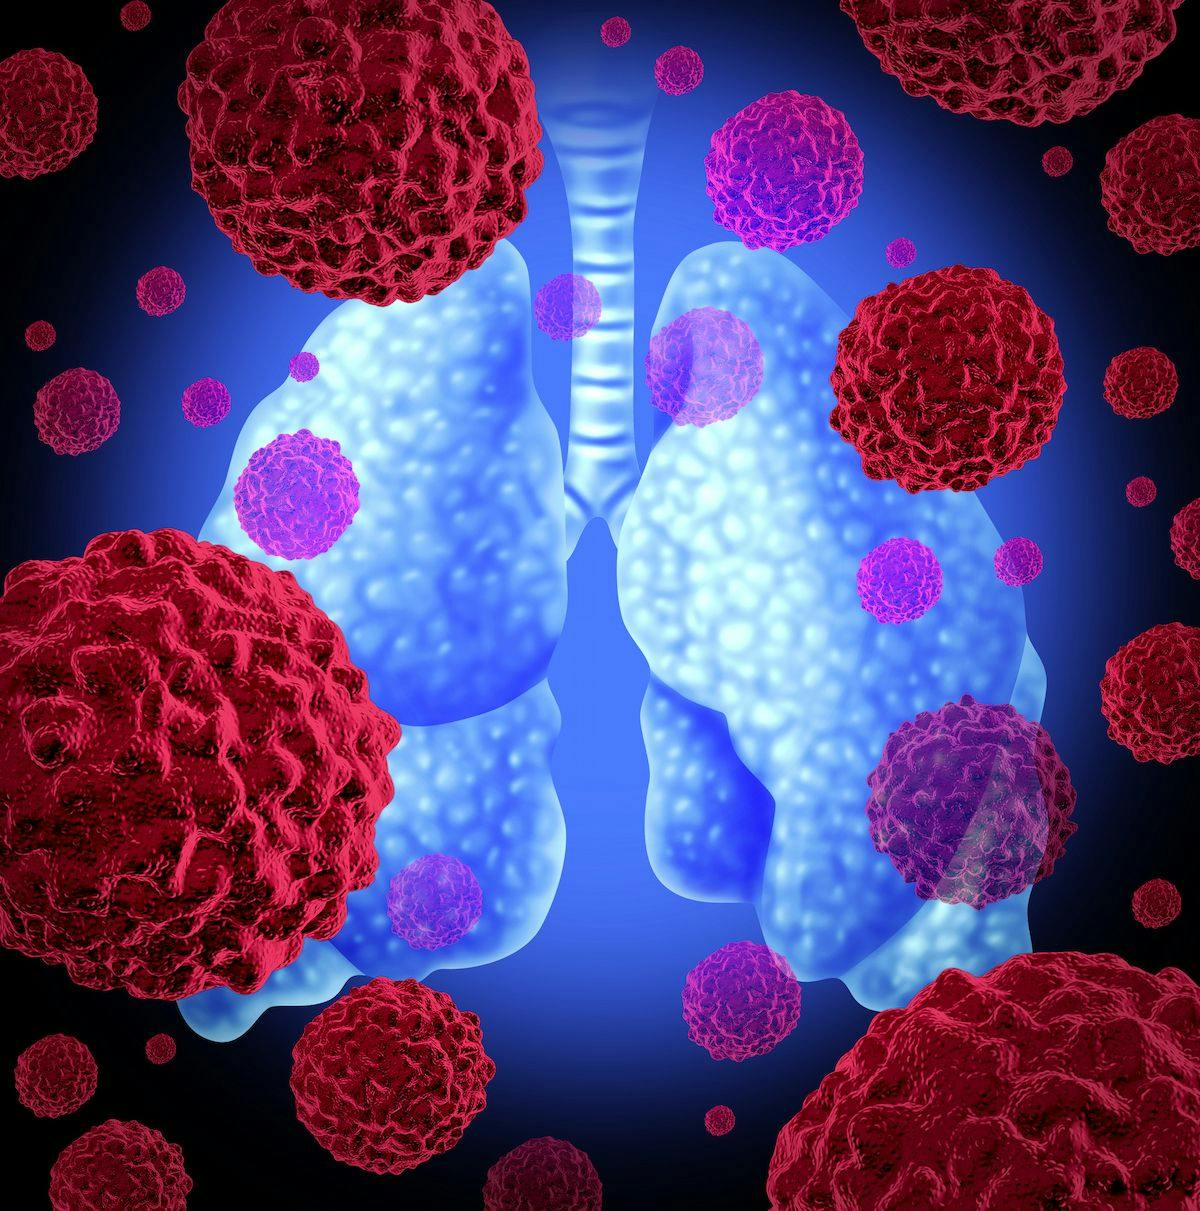 Early findings indicate that CLN-081 may hold promise in patients with advanced EGFR exon 20 insertion mutation–positive non–small cell lung cancer.